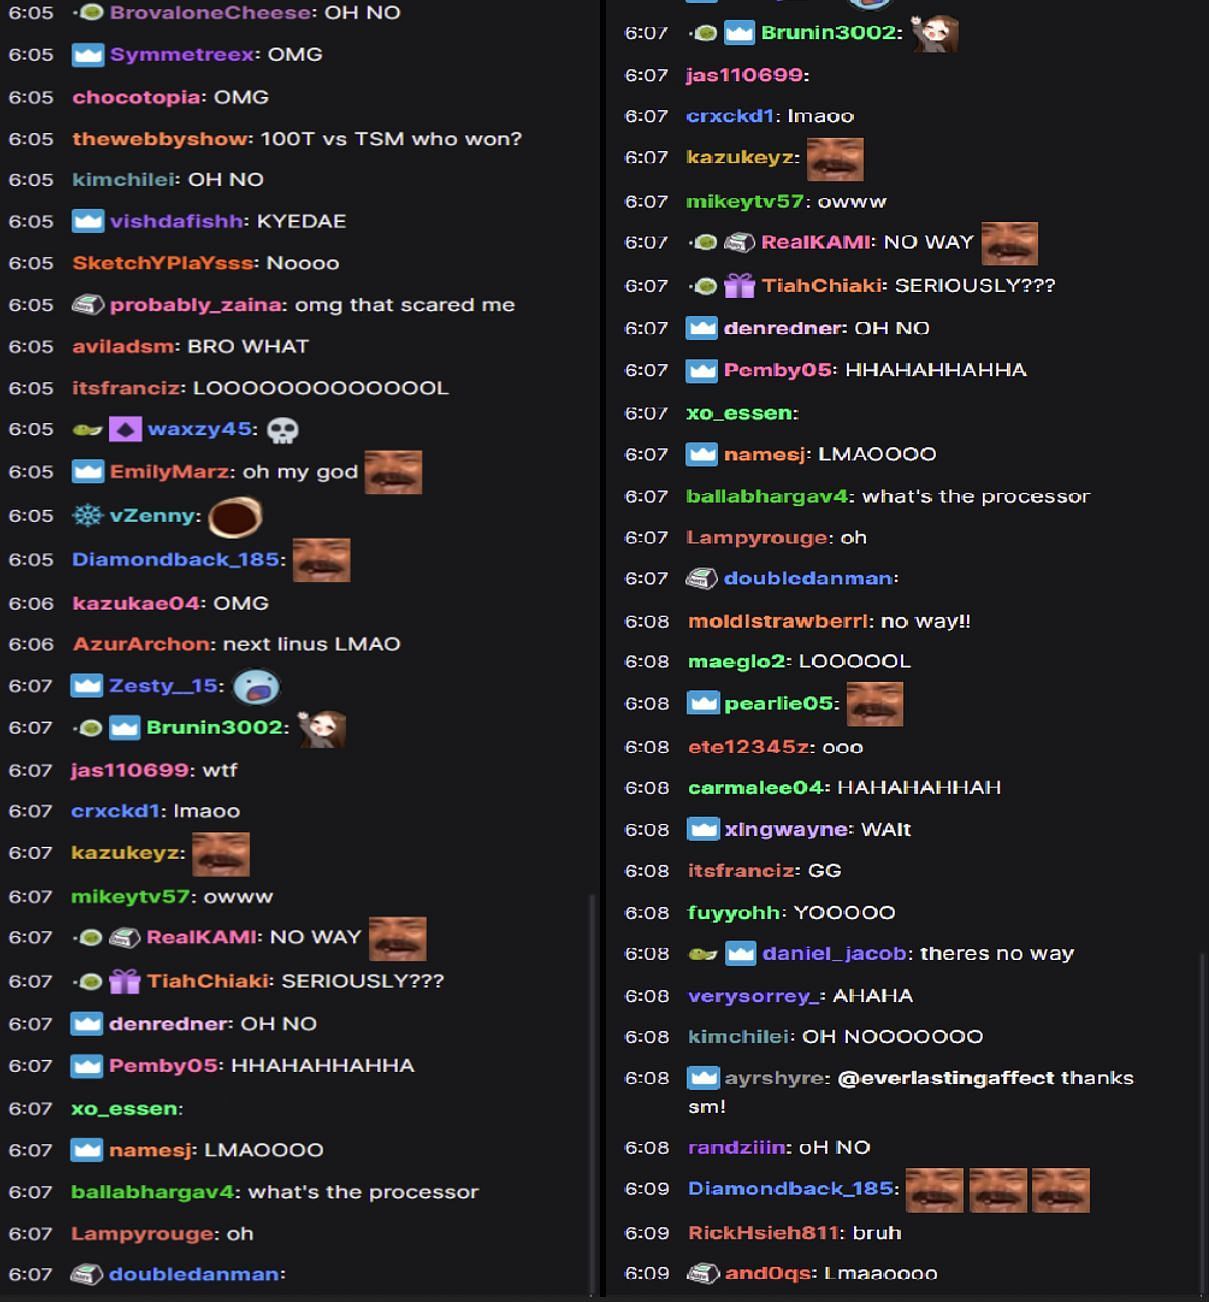 Twitch chat reacting to Kyedae dropping the RTX 3090 (Images via Twitch/Kyedae)